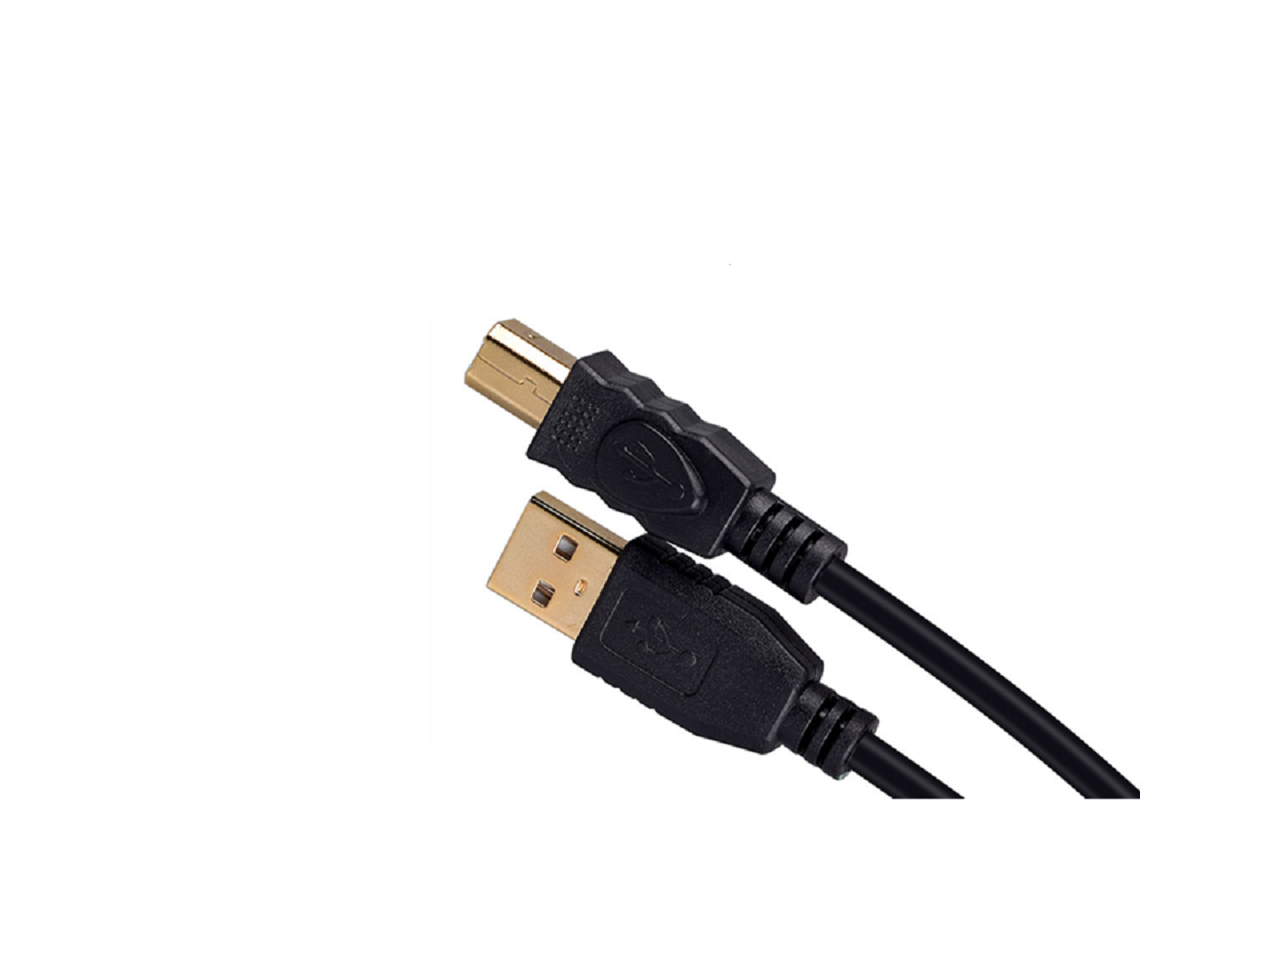 Tekit 24k Gold Plated Usb 20 Cable A Male To B Maleusb 20 A Male To B Male Cable With 0084